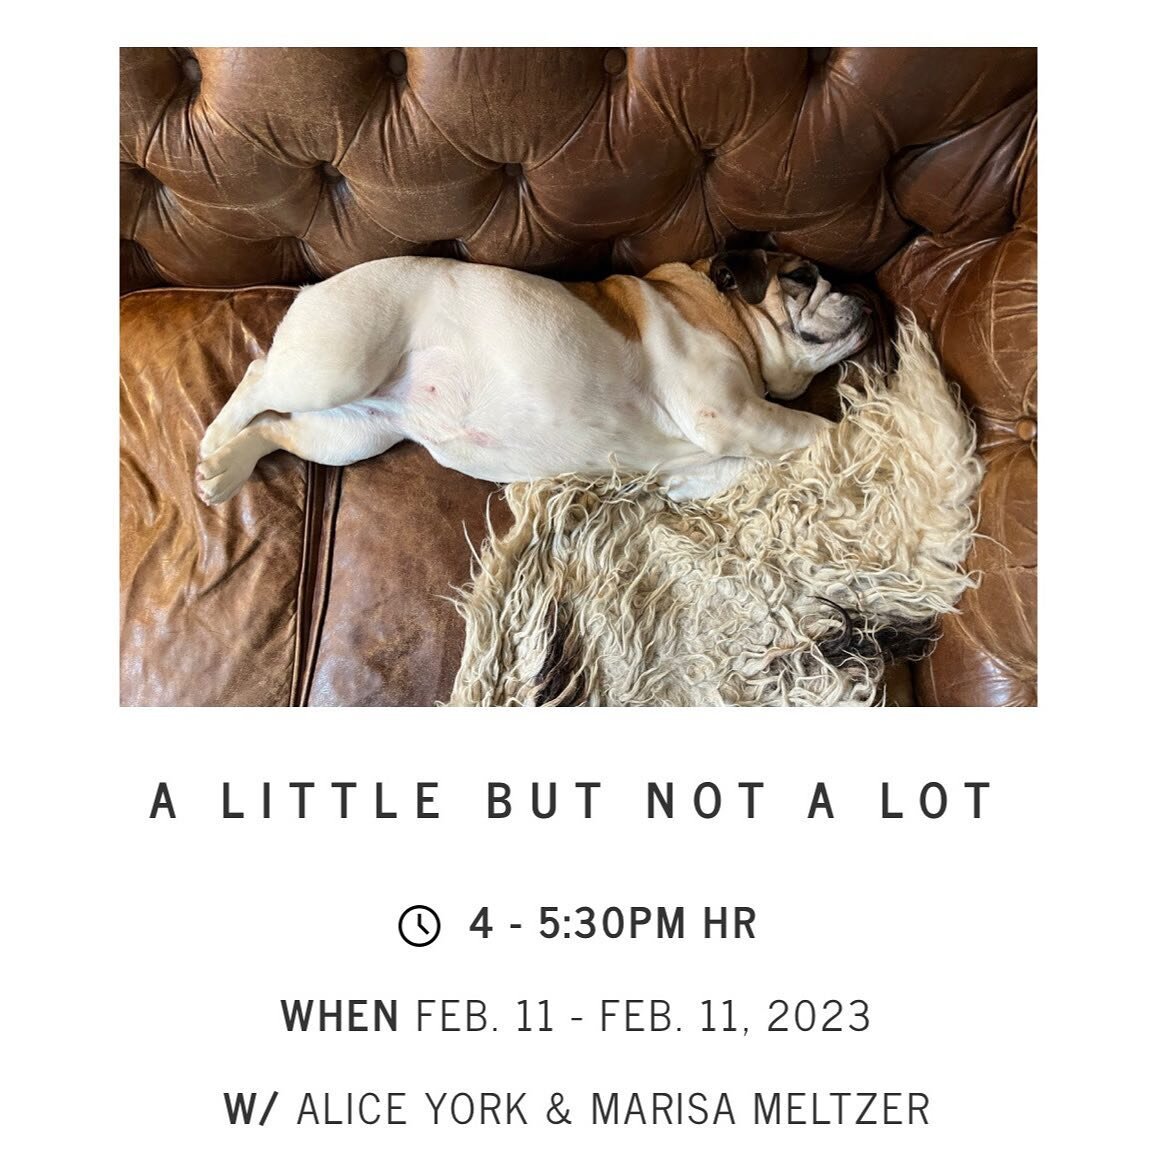 Can&rsquo;t think of a better way to celebrate my 40th birthday next month than with this special class @skyting I&rsquo;m co-teaching with @marisameltzer ! Join us for some truly luxurious restorative yoga, some slow and low stretching, and because 